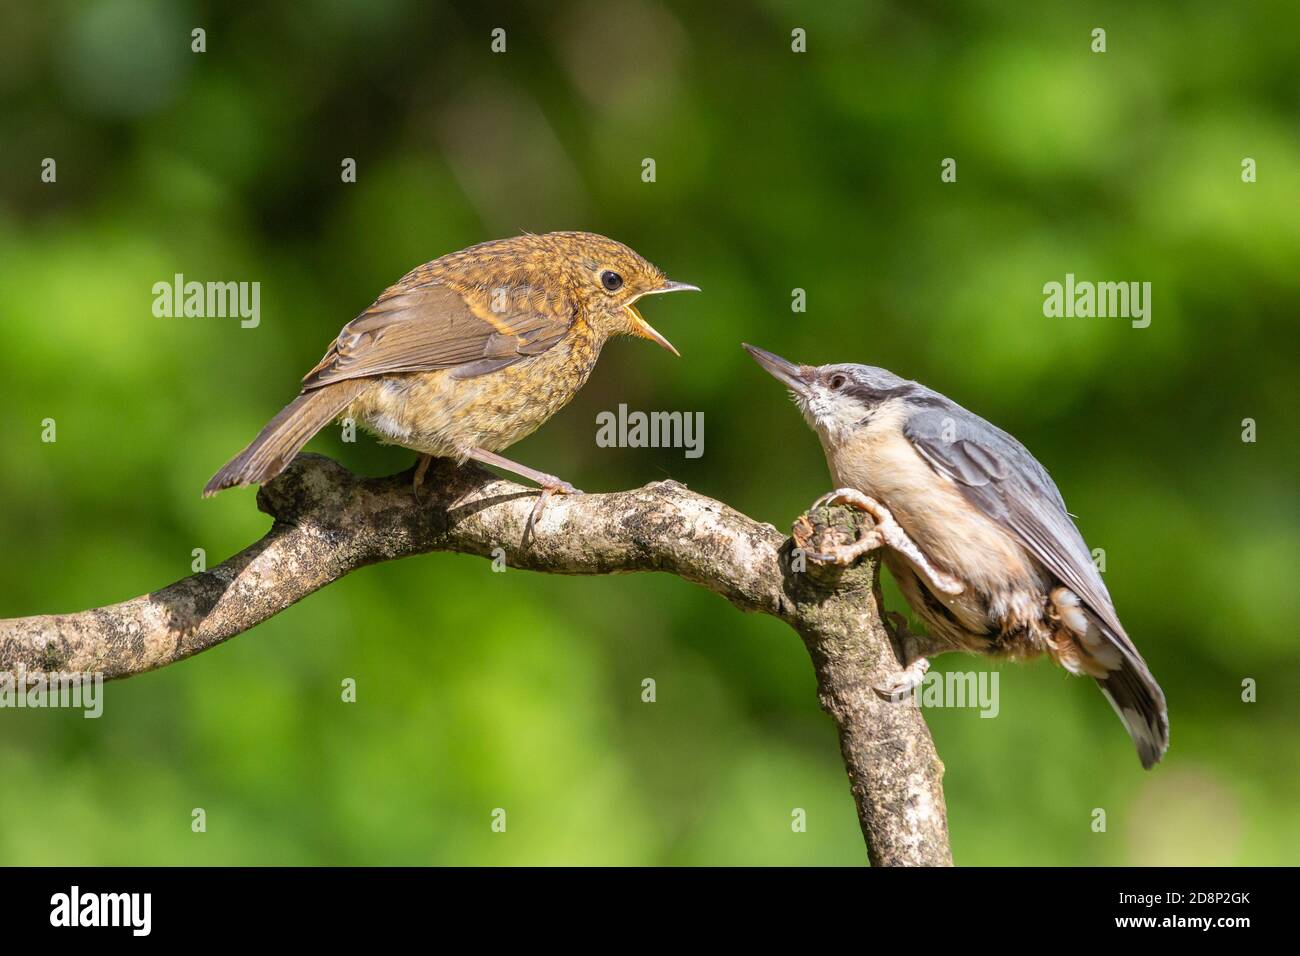 Fledgling Robin [ Erithacus rubecula ] onbranch apparently begging food from an adult Nuthatch [ Sitta europaea ] Stock Photo